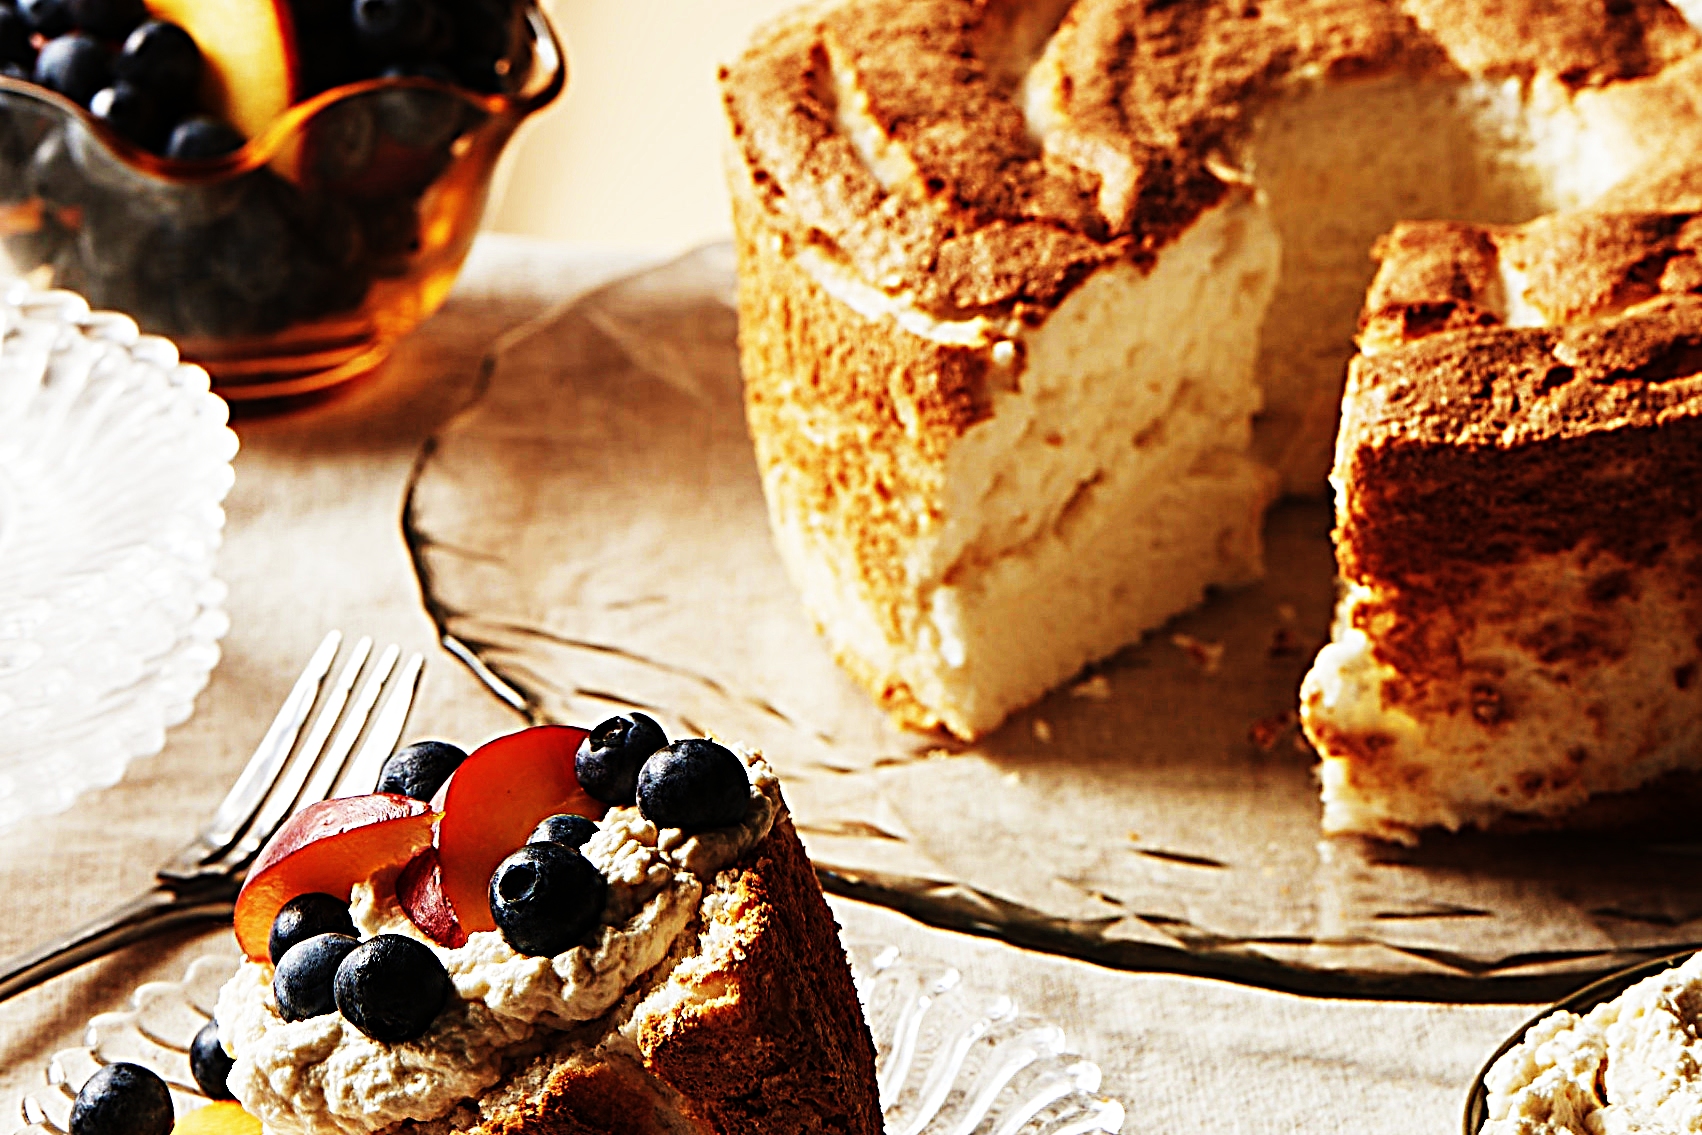 Stupid-Easy Recipe for Angel Food Cake with Marsala Whipped Cream and Fresh Berries (#1 Top-Rated)